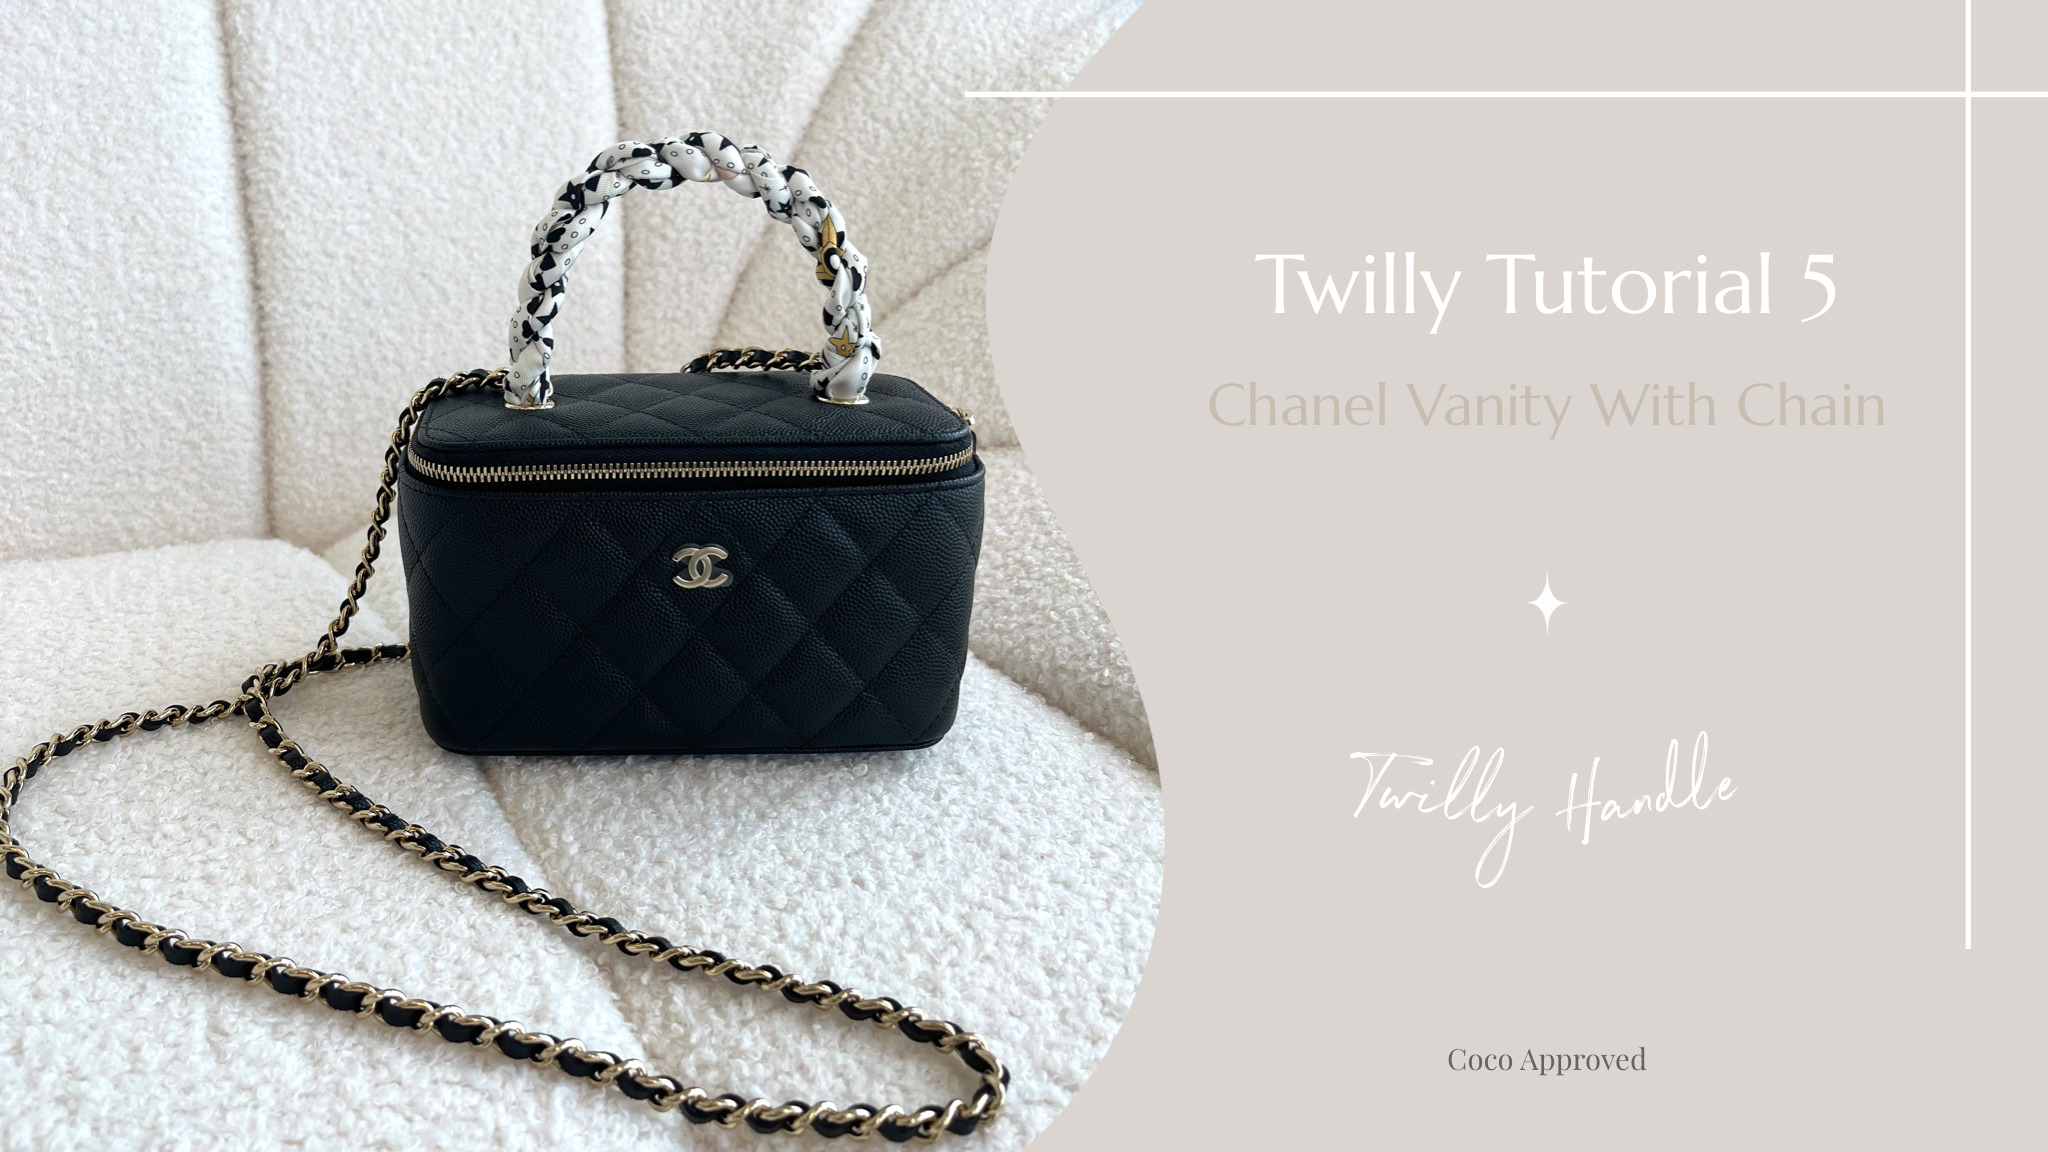 Add-on Twilly Handle On Chanel Vanity With Chain - Twilly Tutorial